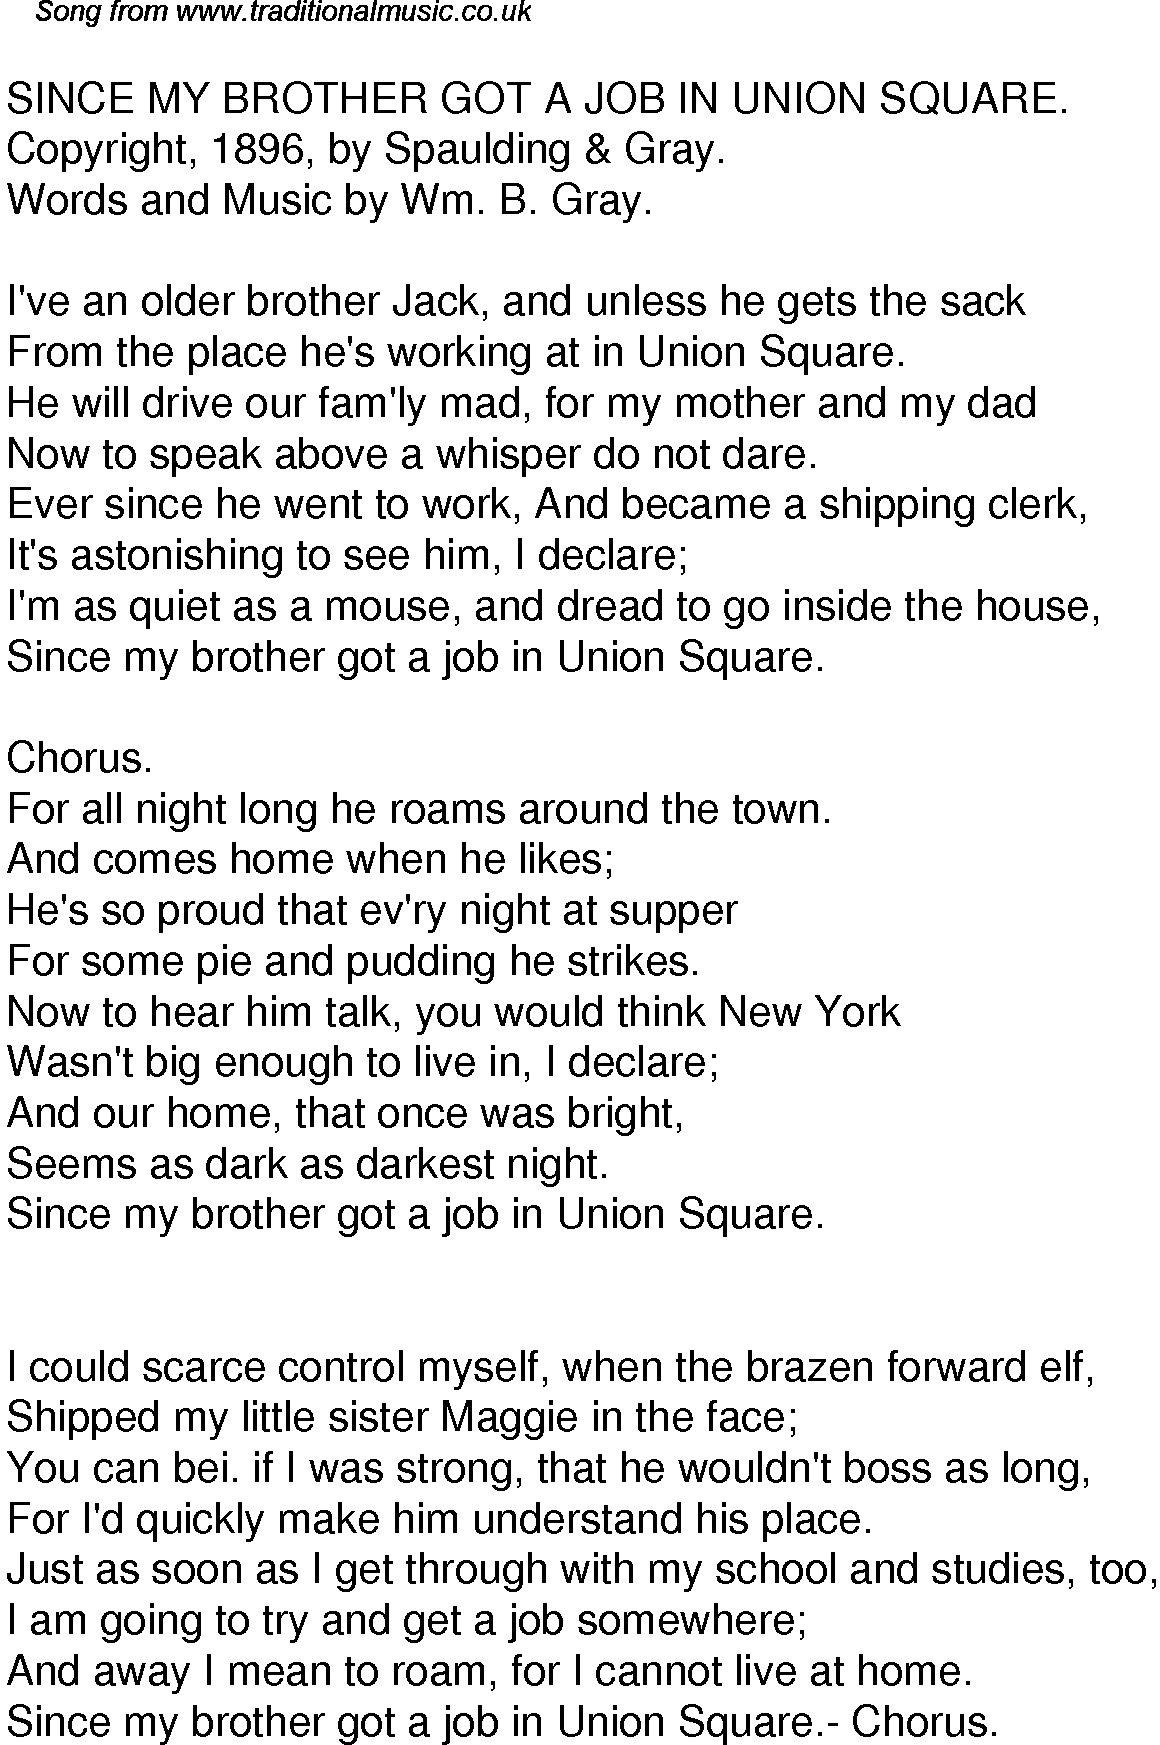 Old Time Song Lyrics For 50 Since My Brother Got A Job In Union Square